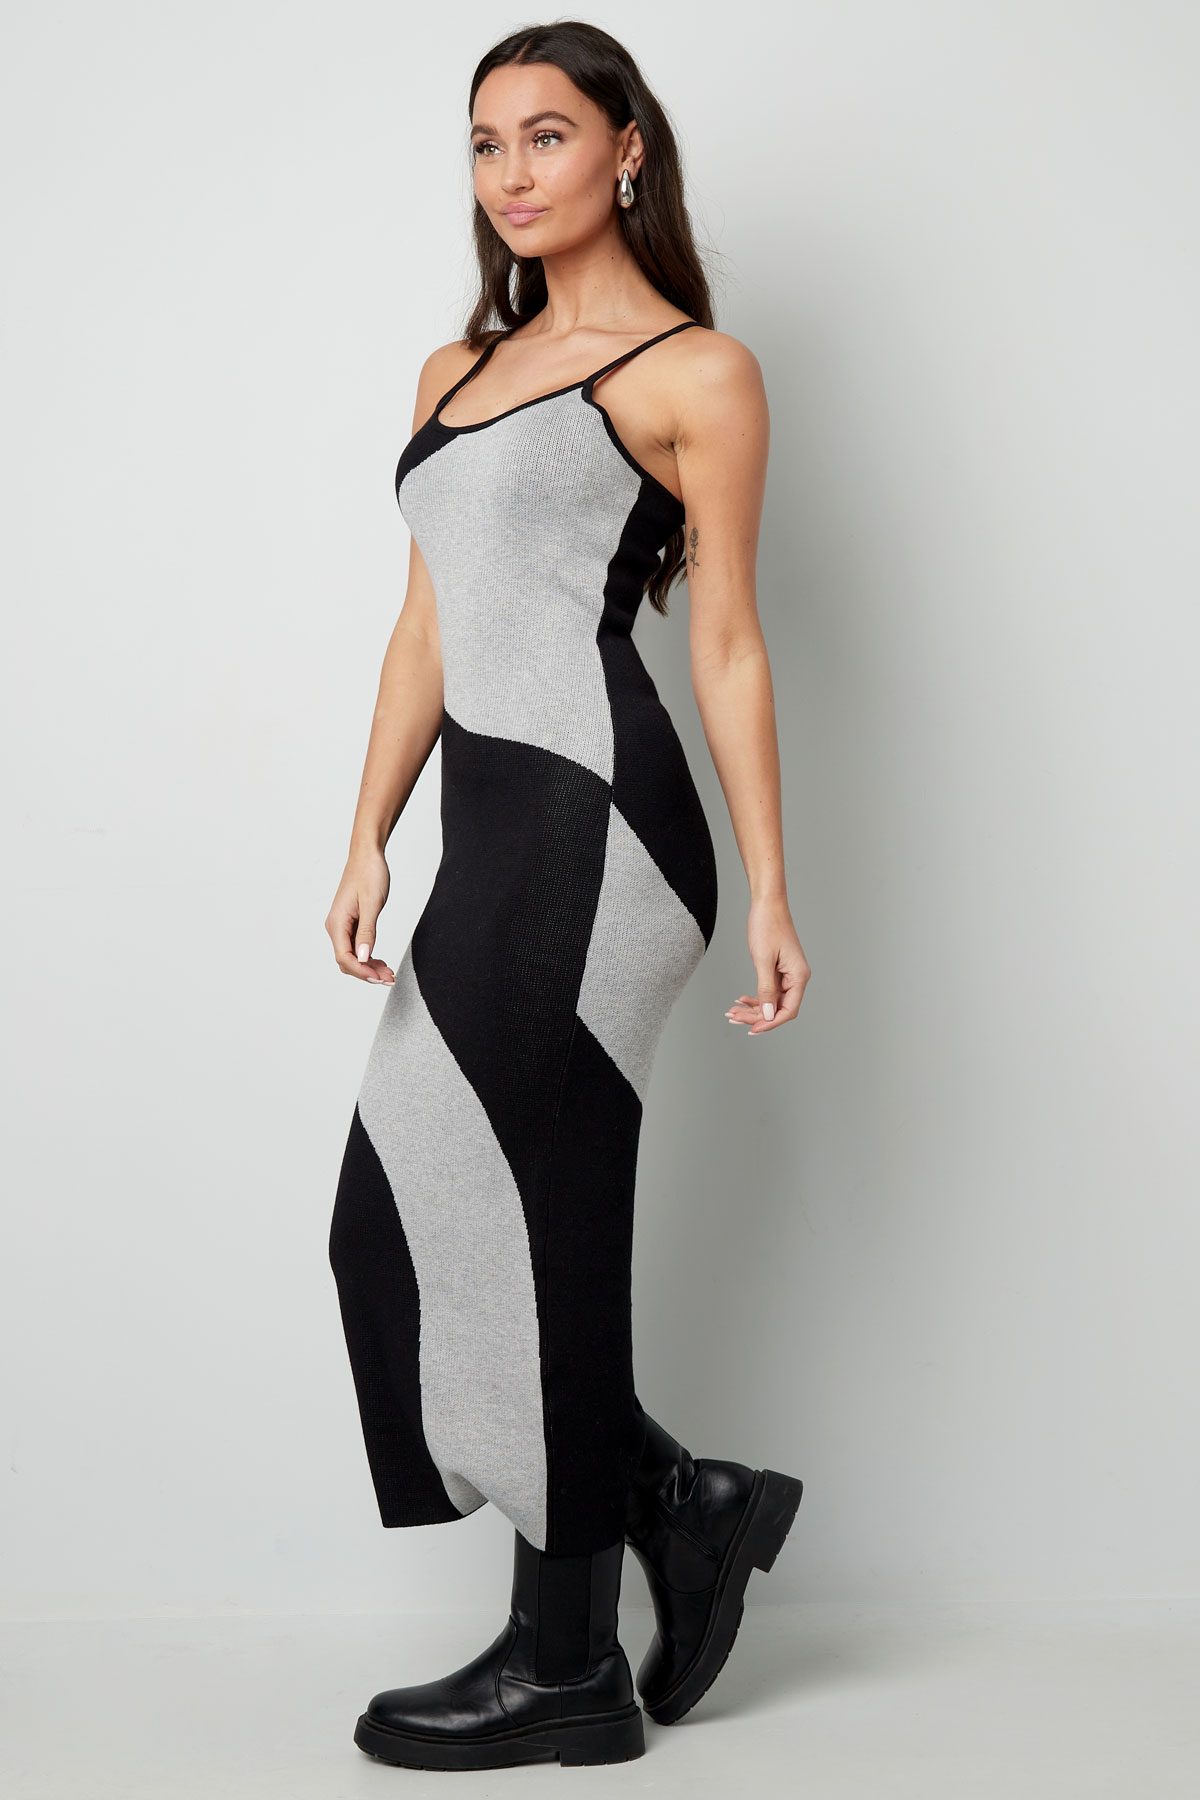 Organic print dress - black and white h5 Picture9